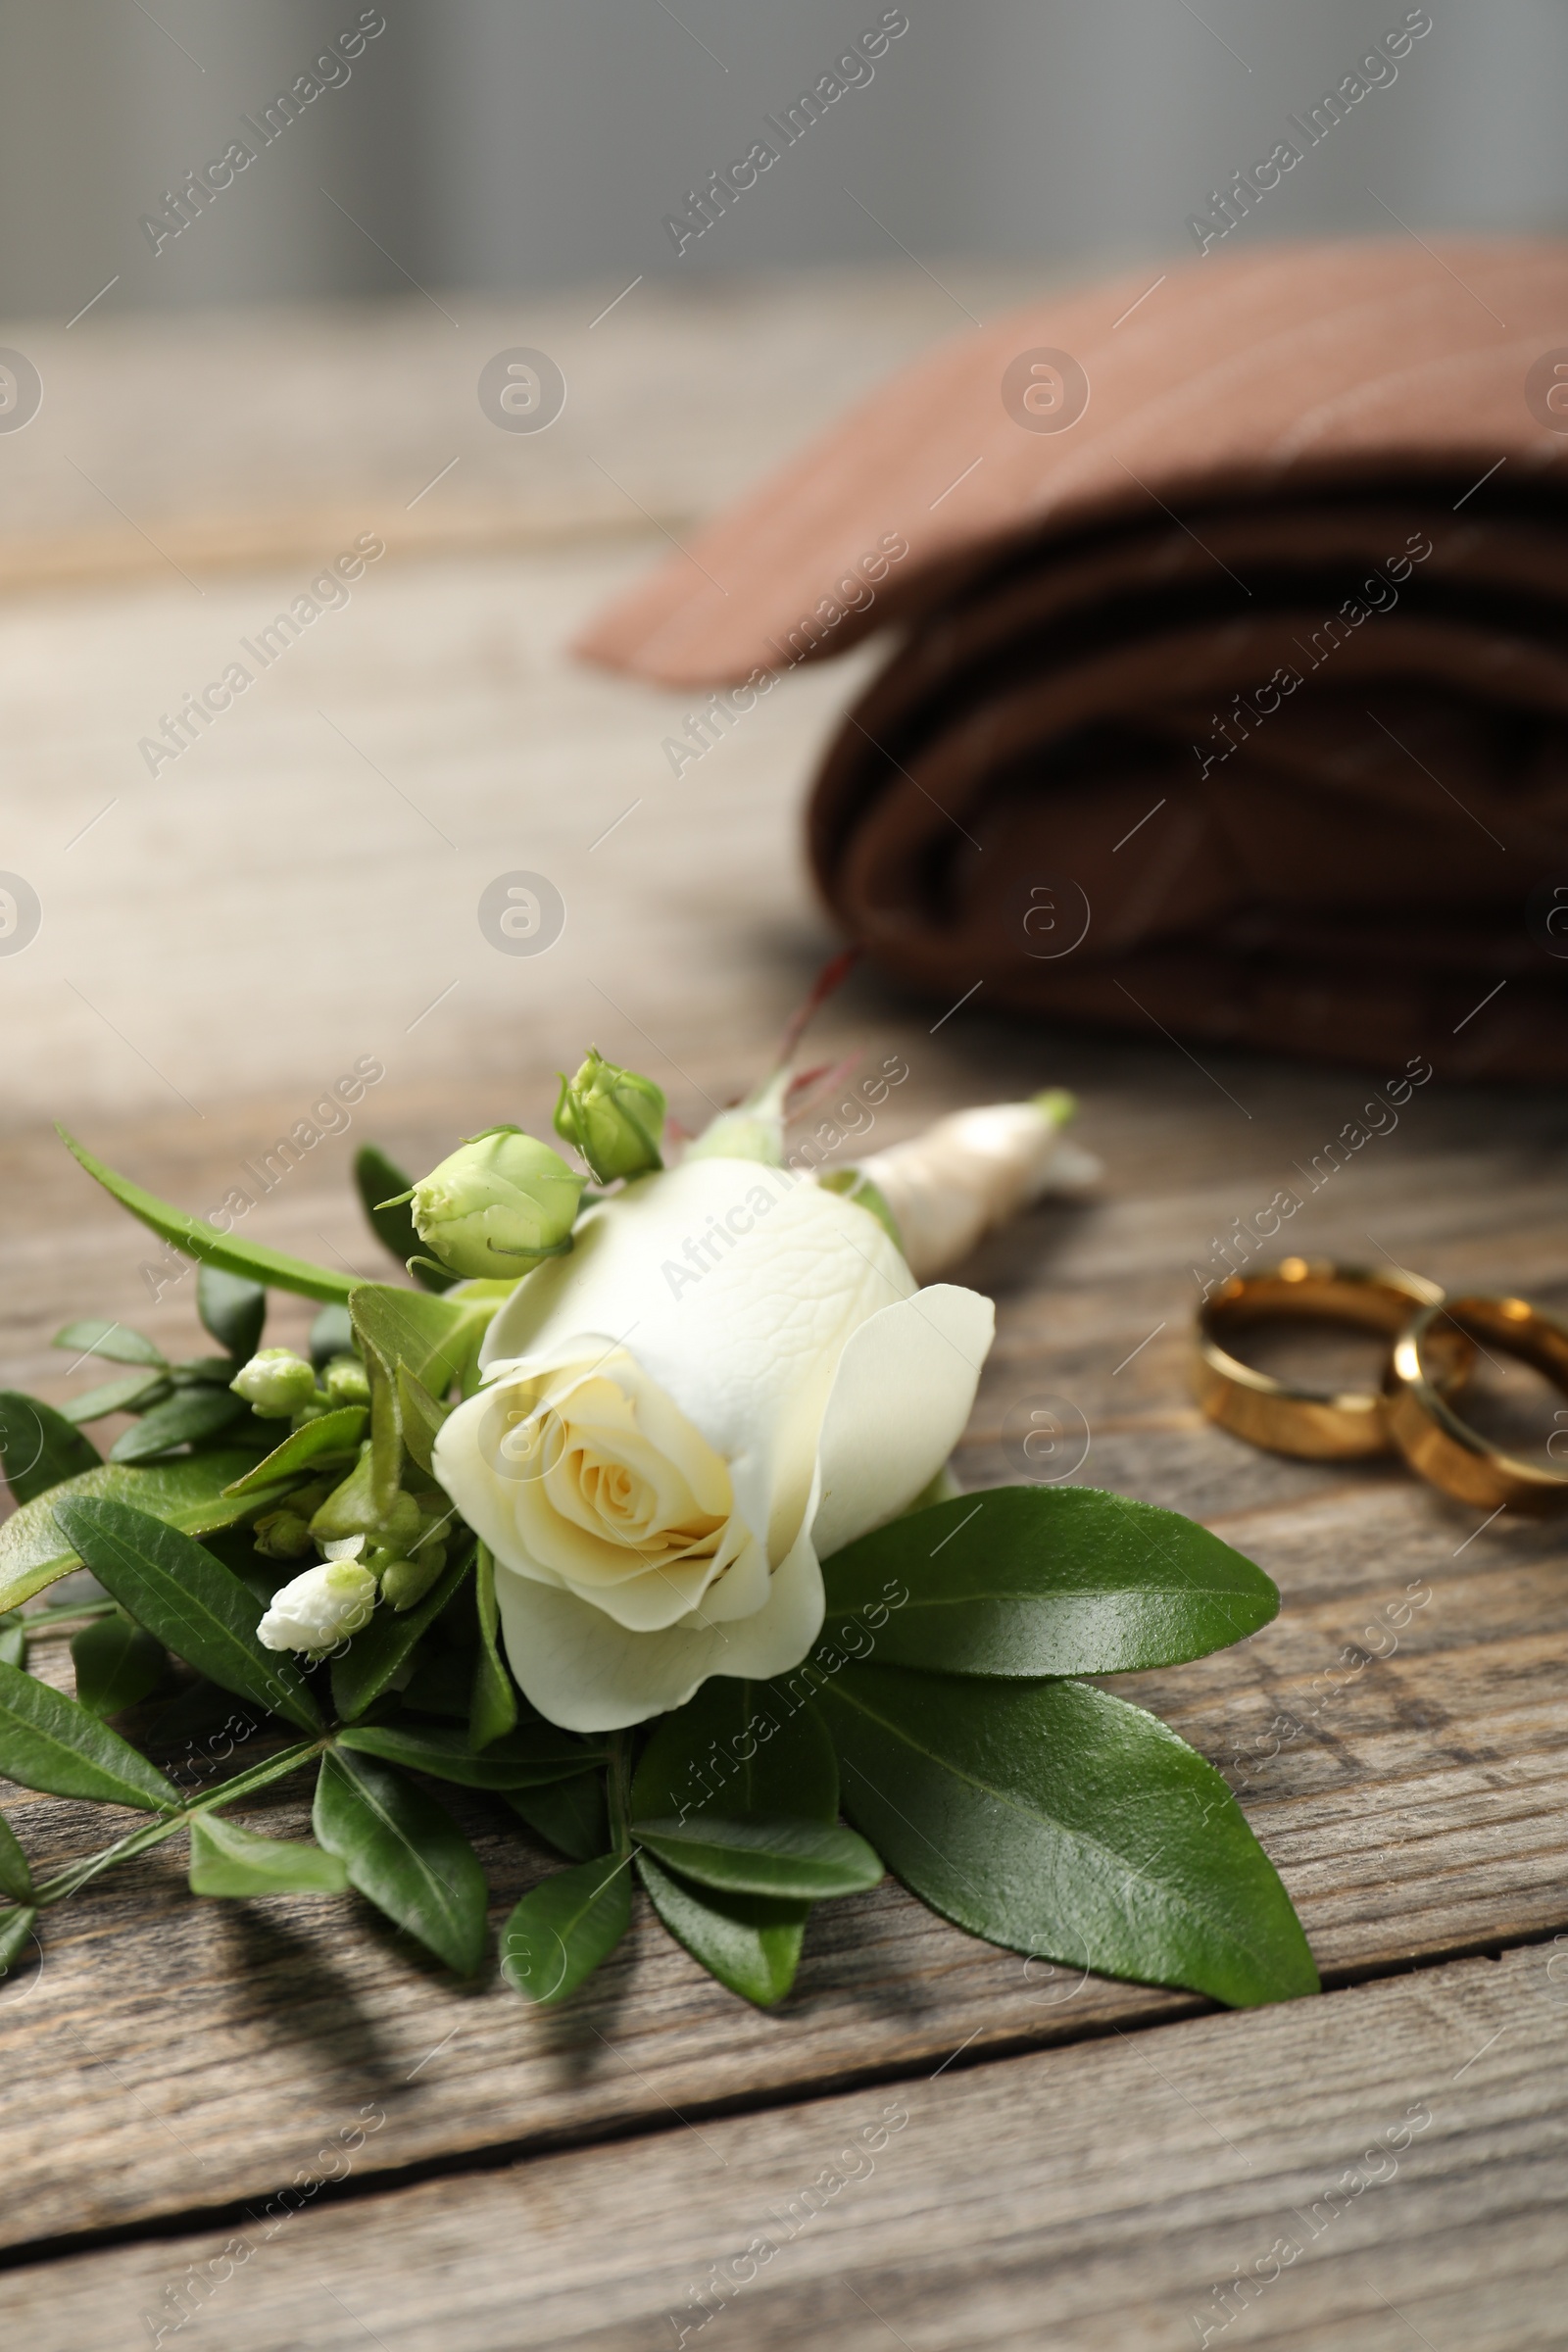 Photo of Wedding stuff. Stylish boutonniere, tie and rings on wooden table, closeup